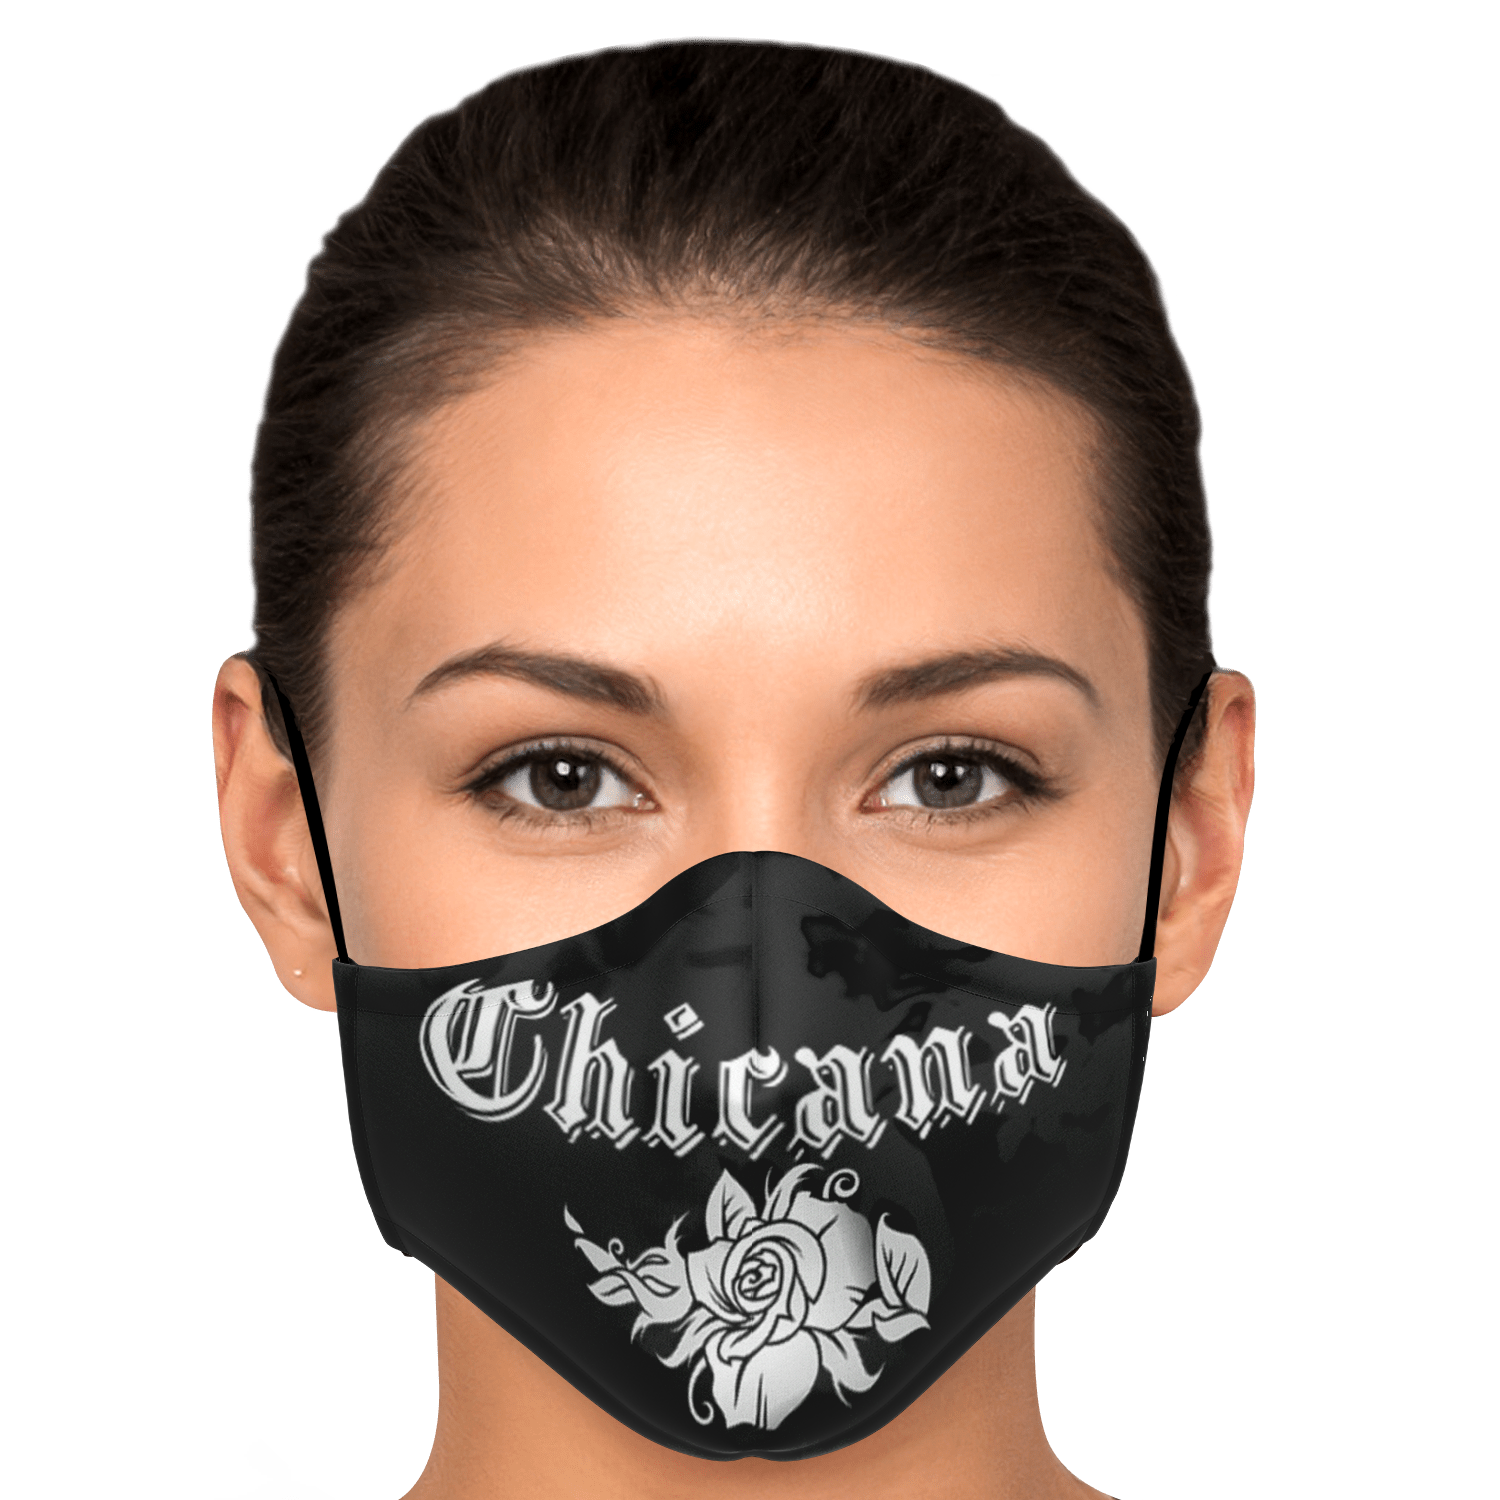 Chicana Soldier Face Mask Adult Fashion Face Mask - Loyalty Vibes